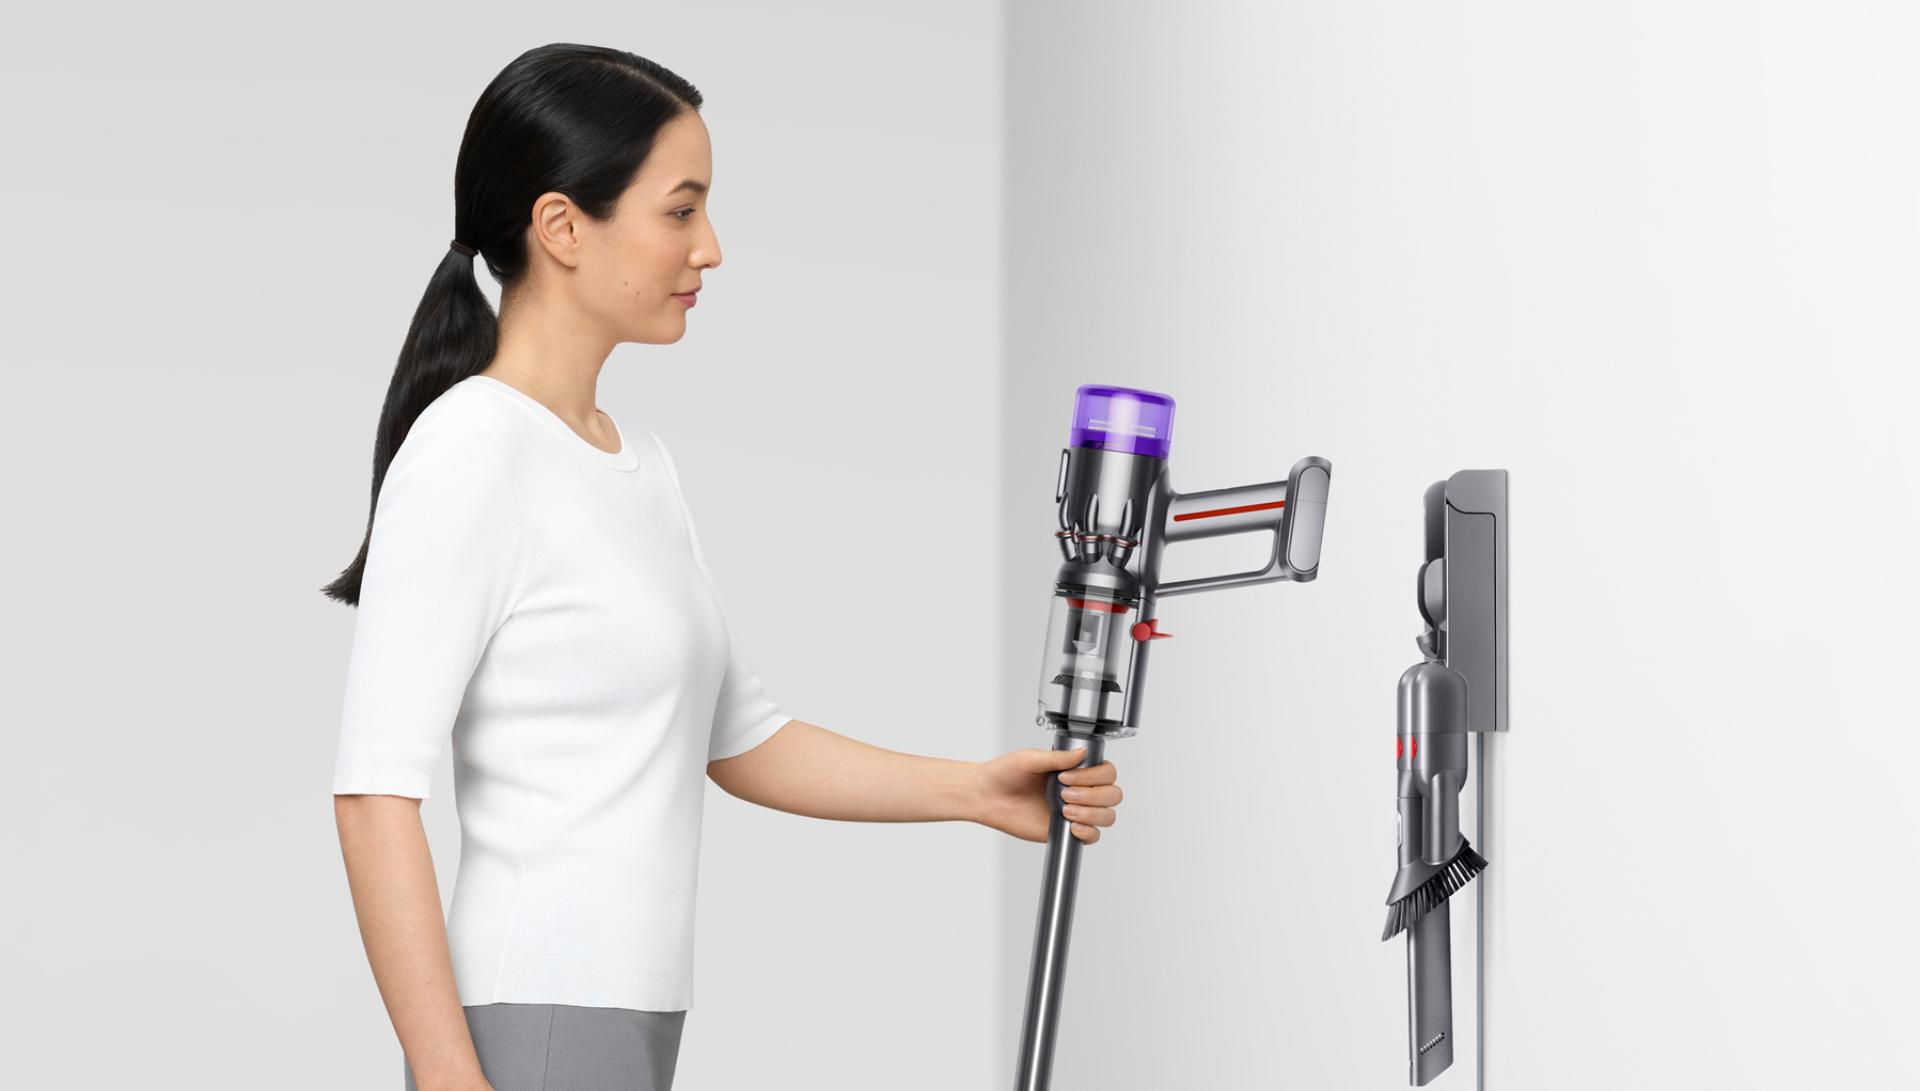 Dyson Micro 1.5kg™ vacuum being placed in the wall dock